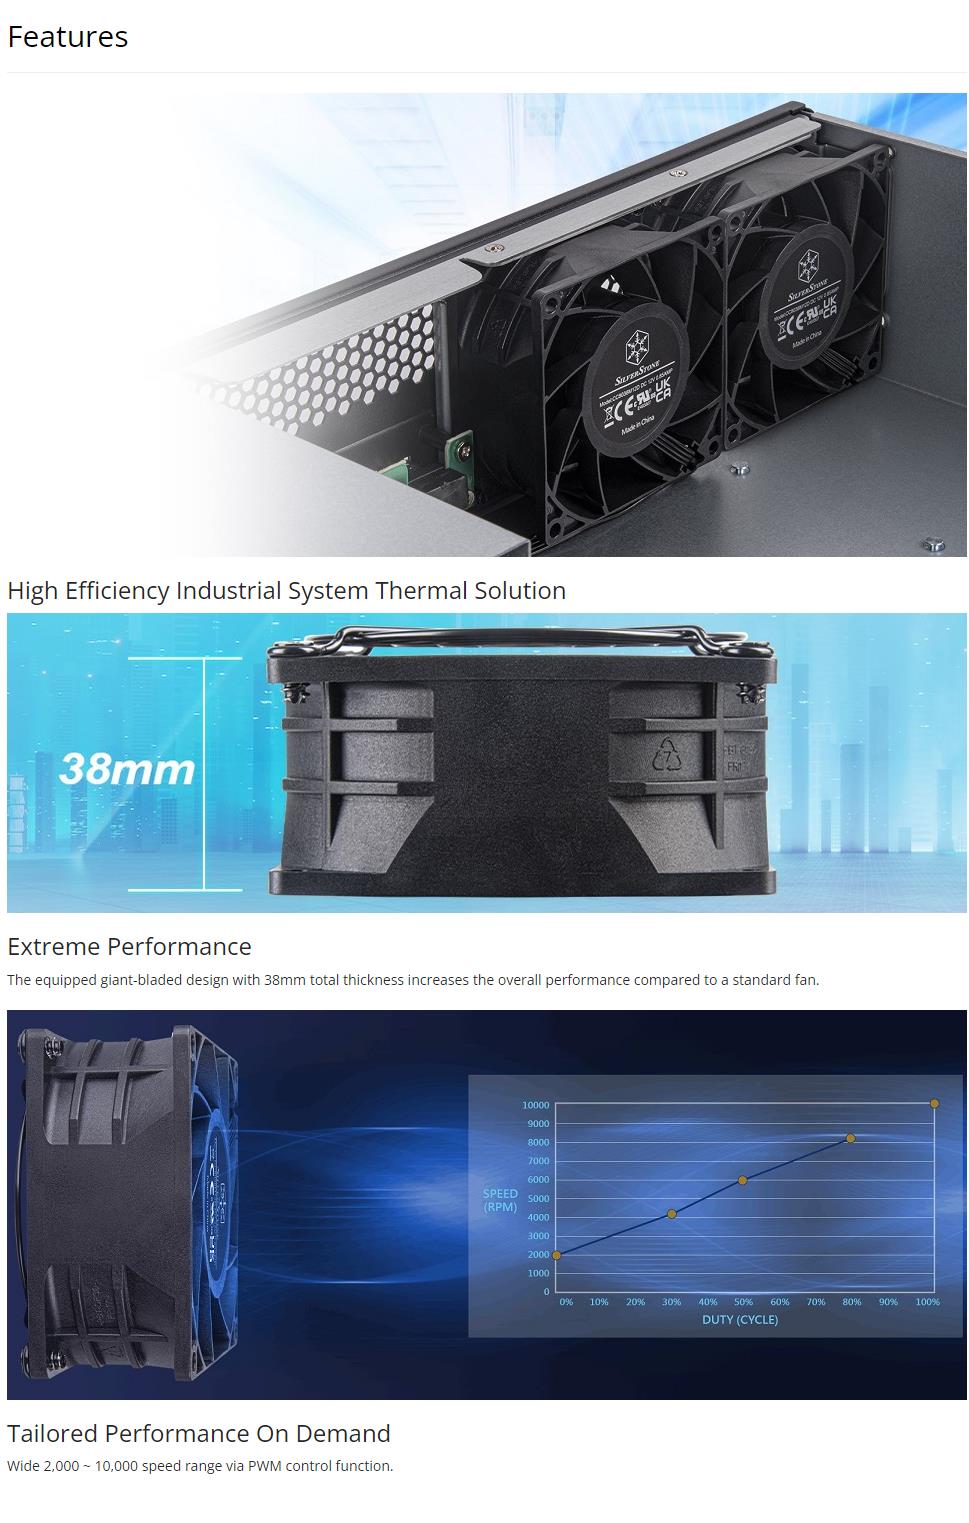 A large marketing image providing additional information about the product SilverStone FHS 80X High Performance 80mm PWM Industrial Cooling Fan - Additional alt info not provided